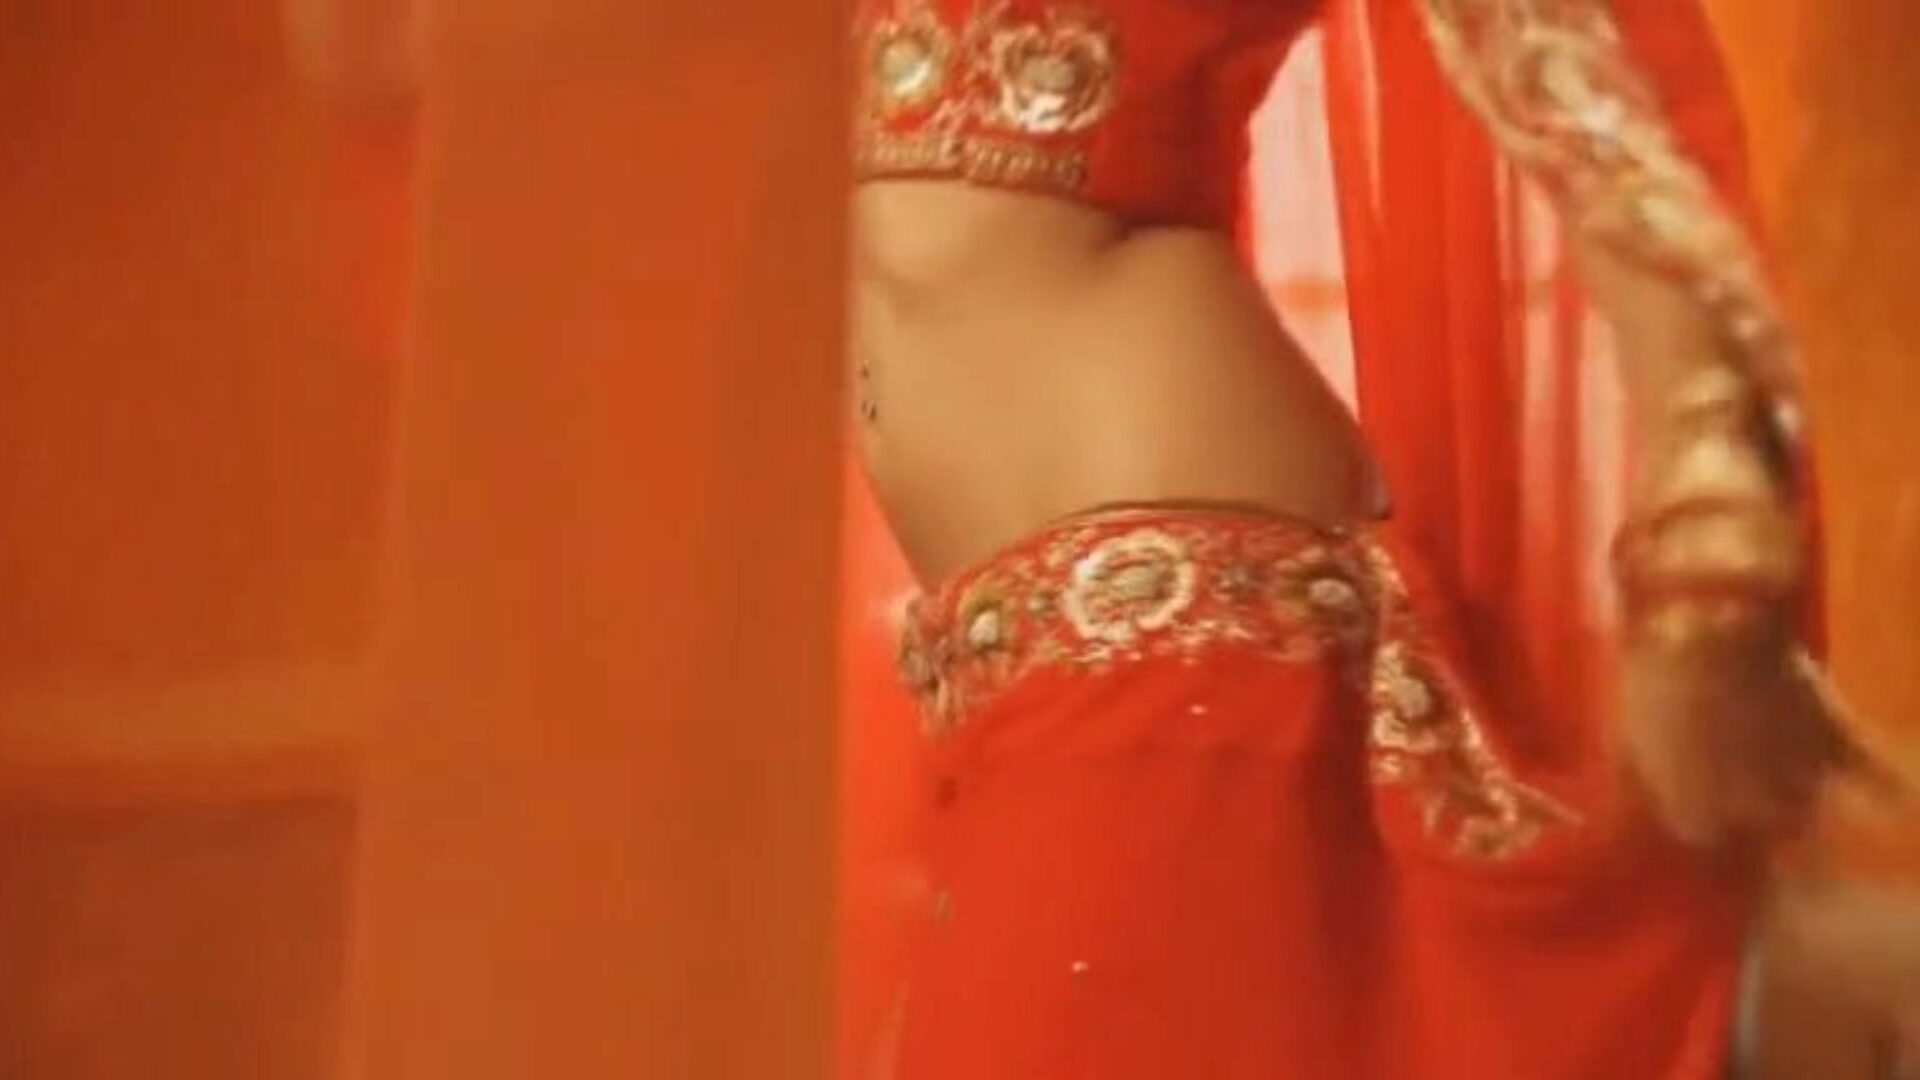 Bollywood Girl Erotic Dancer Brunette Hair girl from india dances softcore and sensual to music.